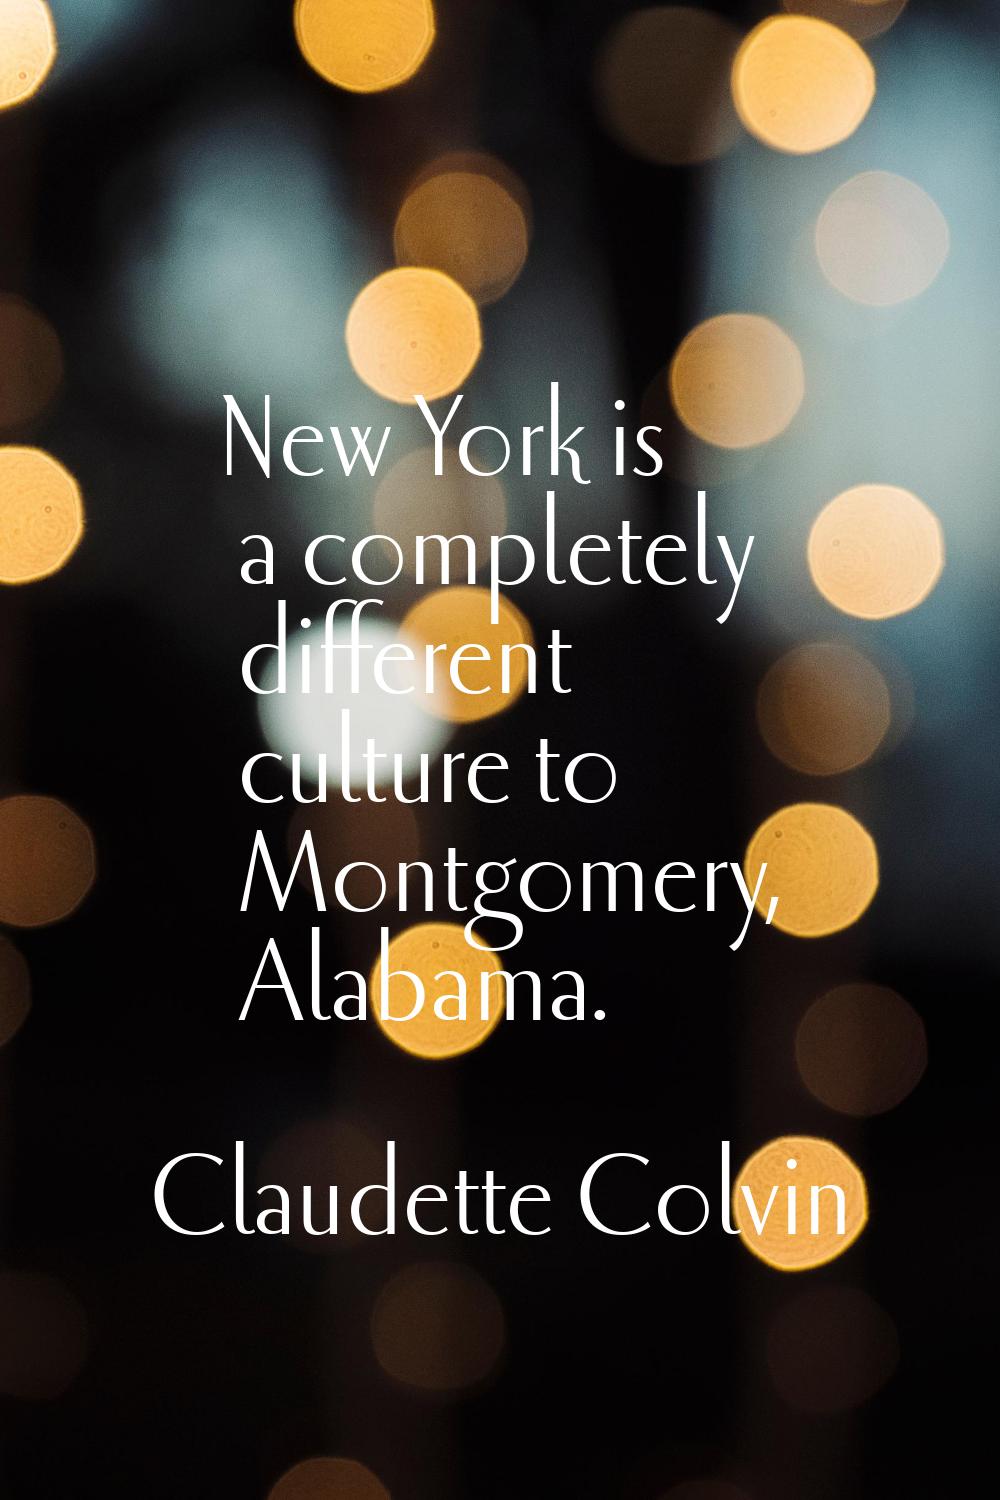 New York is a completely different culture to Montgomery, Alabama.